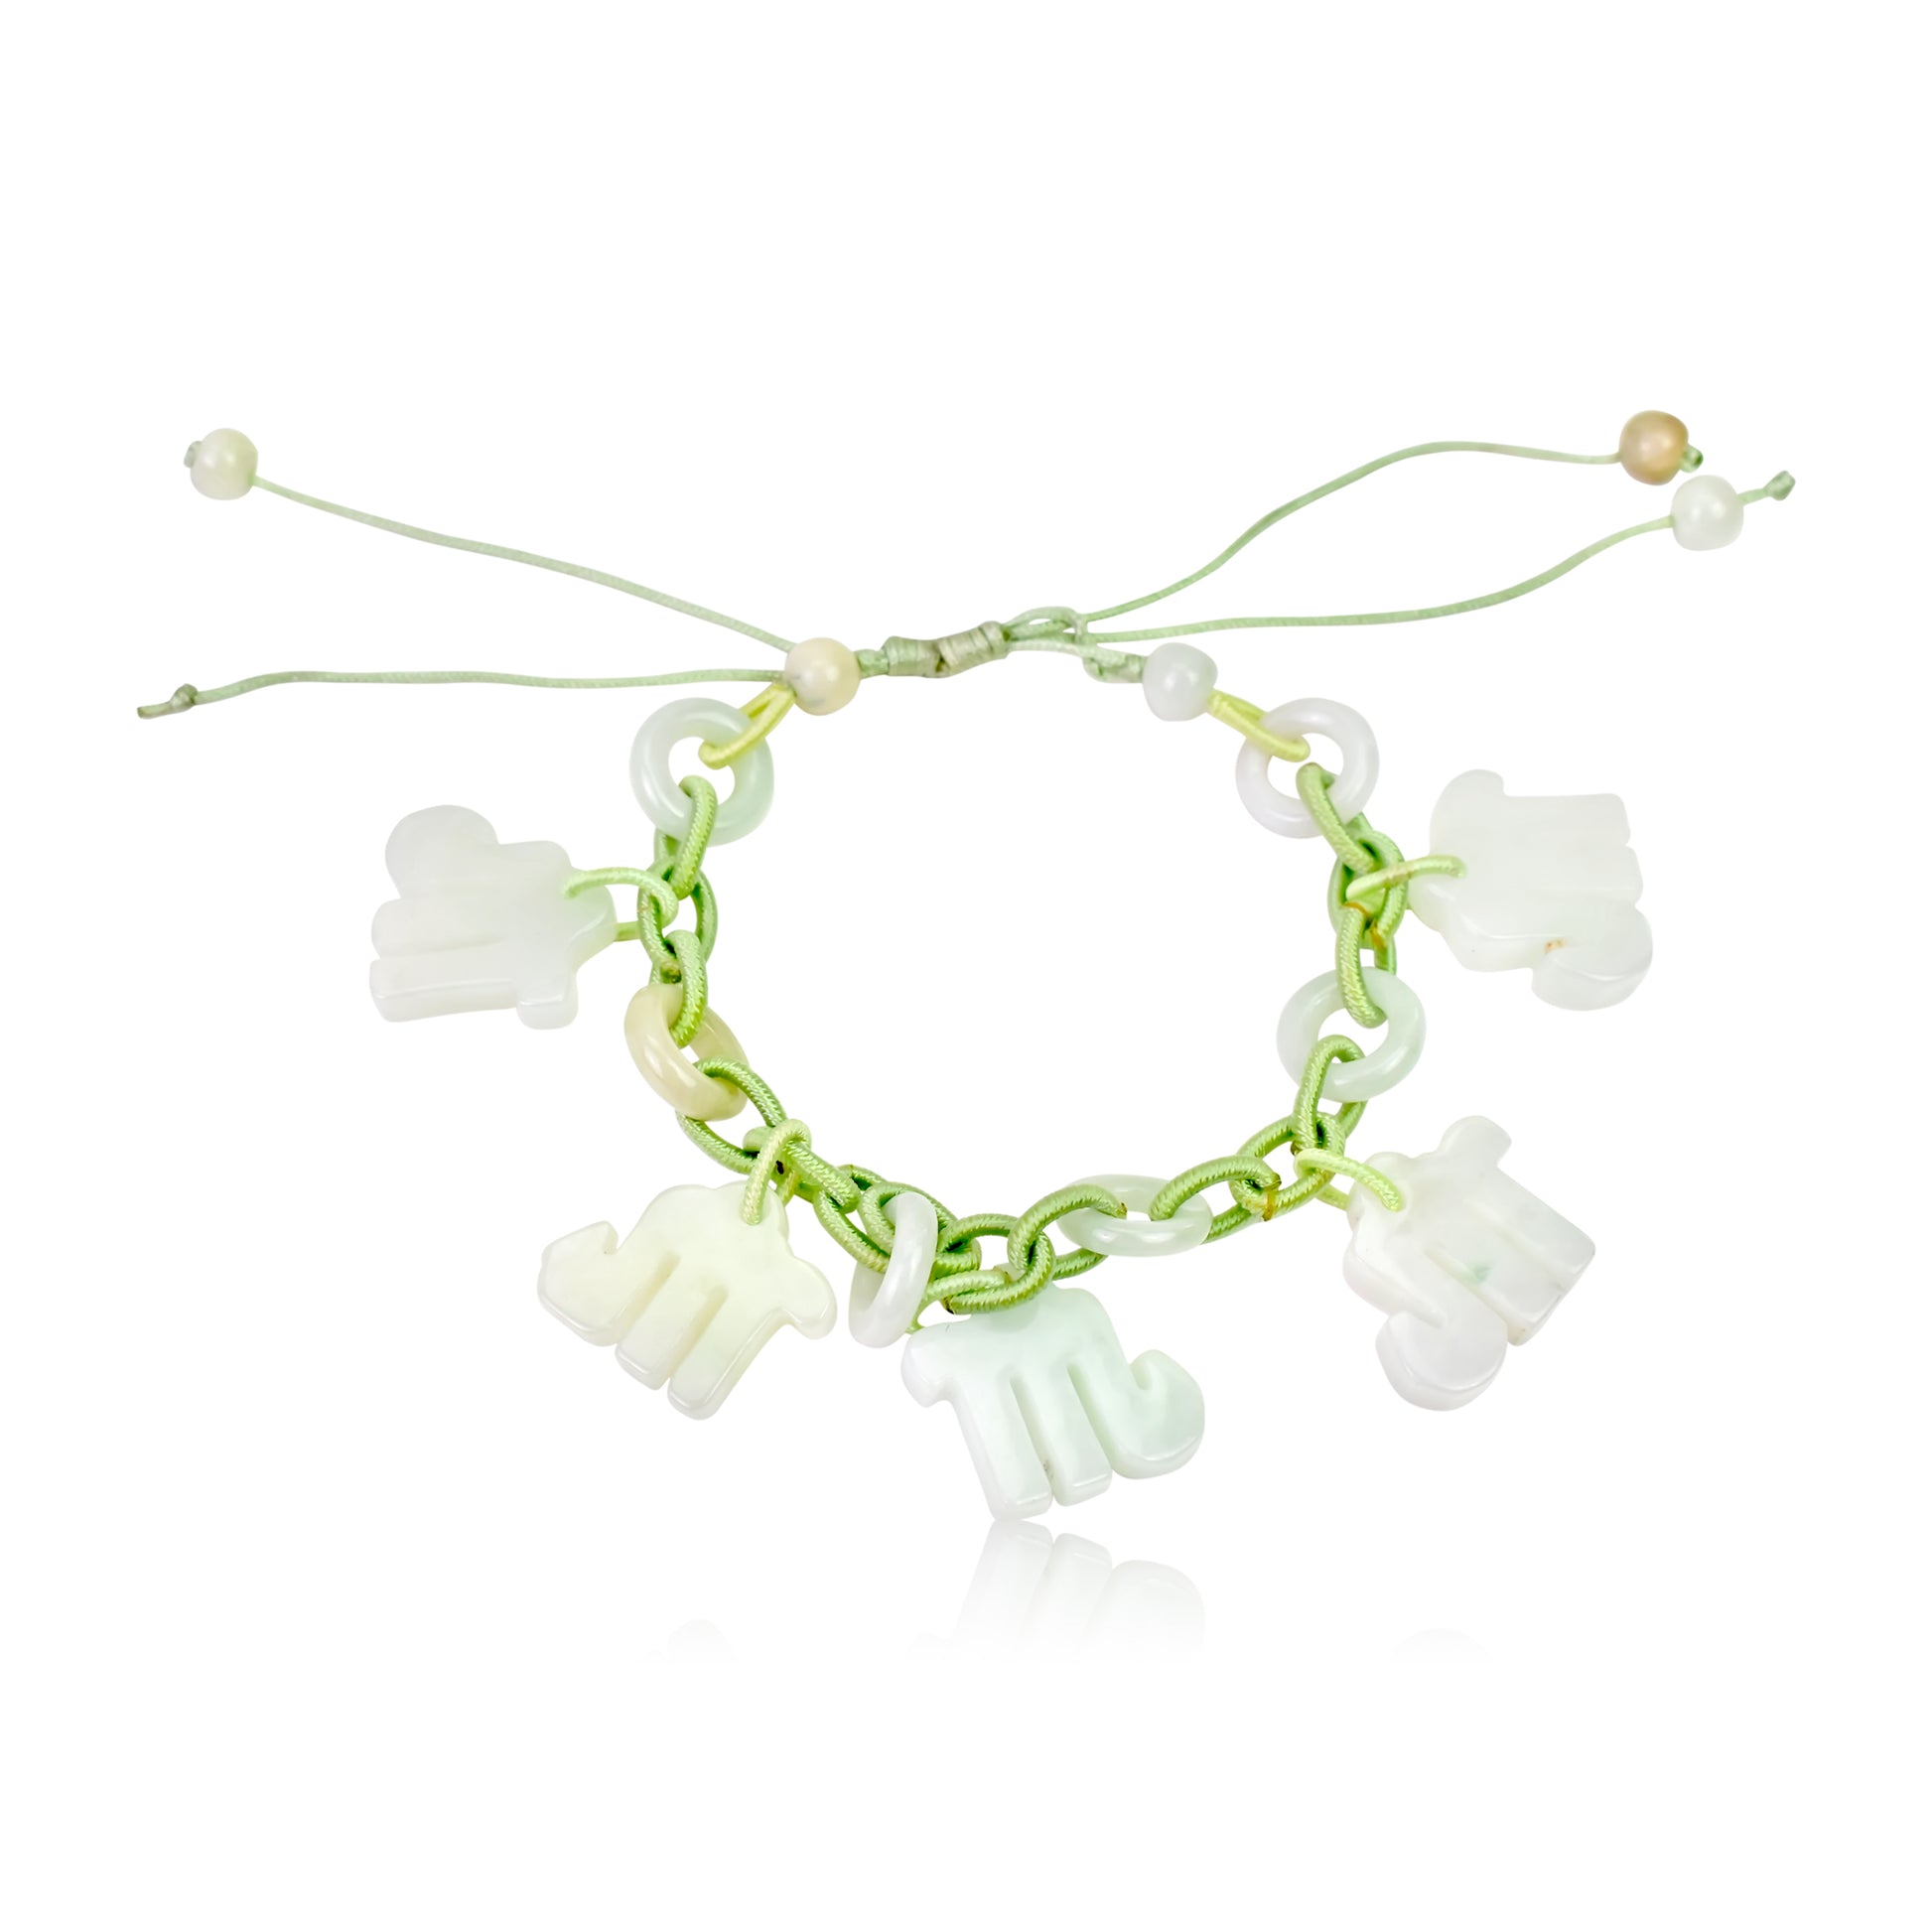 Celebrate Your Scorpio Personality with a Jade Bracelet made with Sea Green Cord